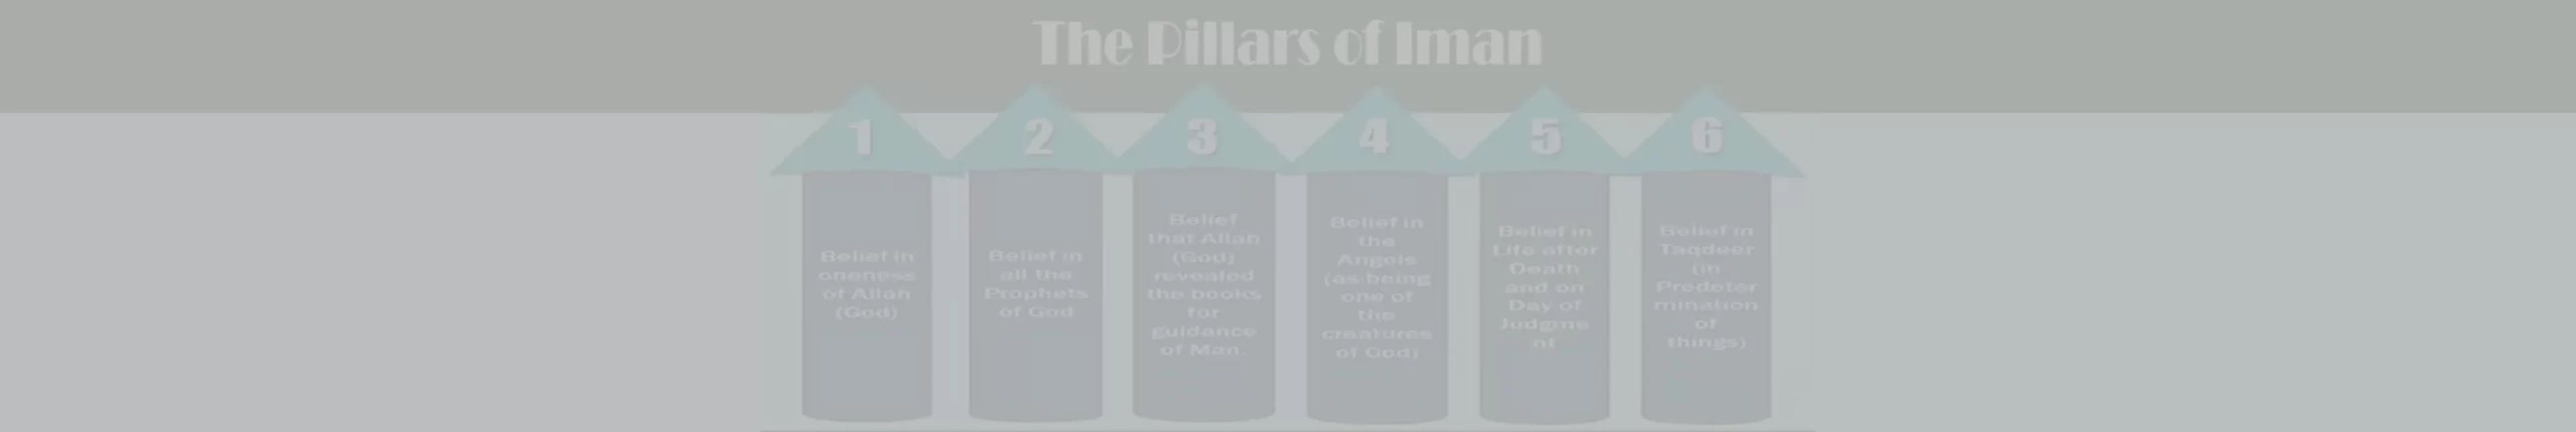 What are the 6 Pillars of Iman